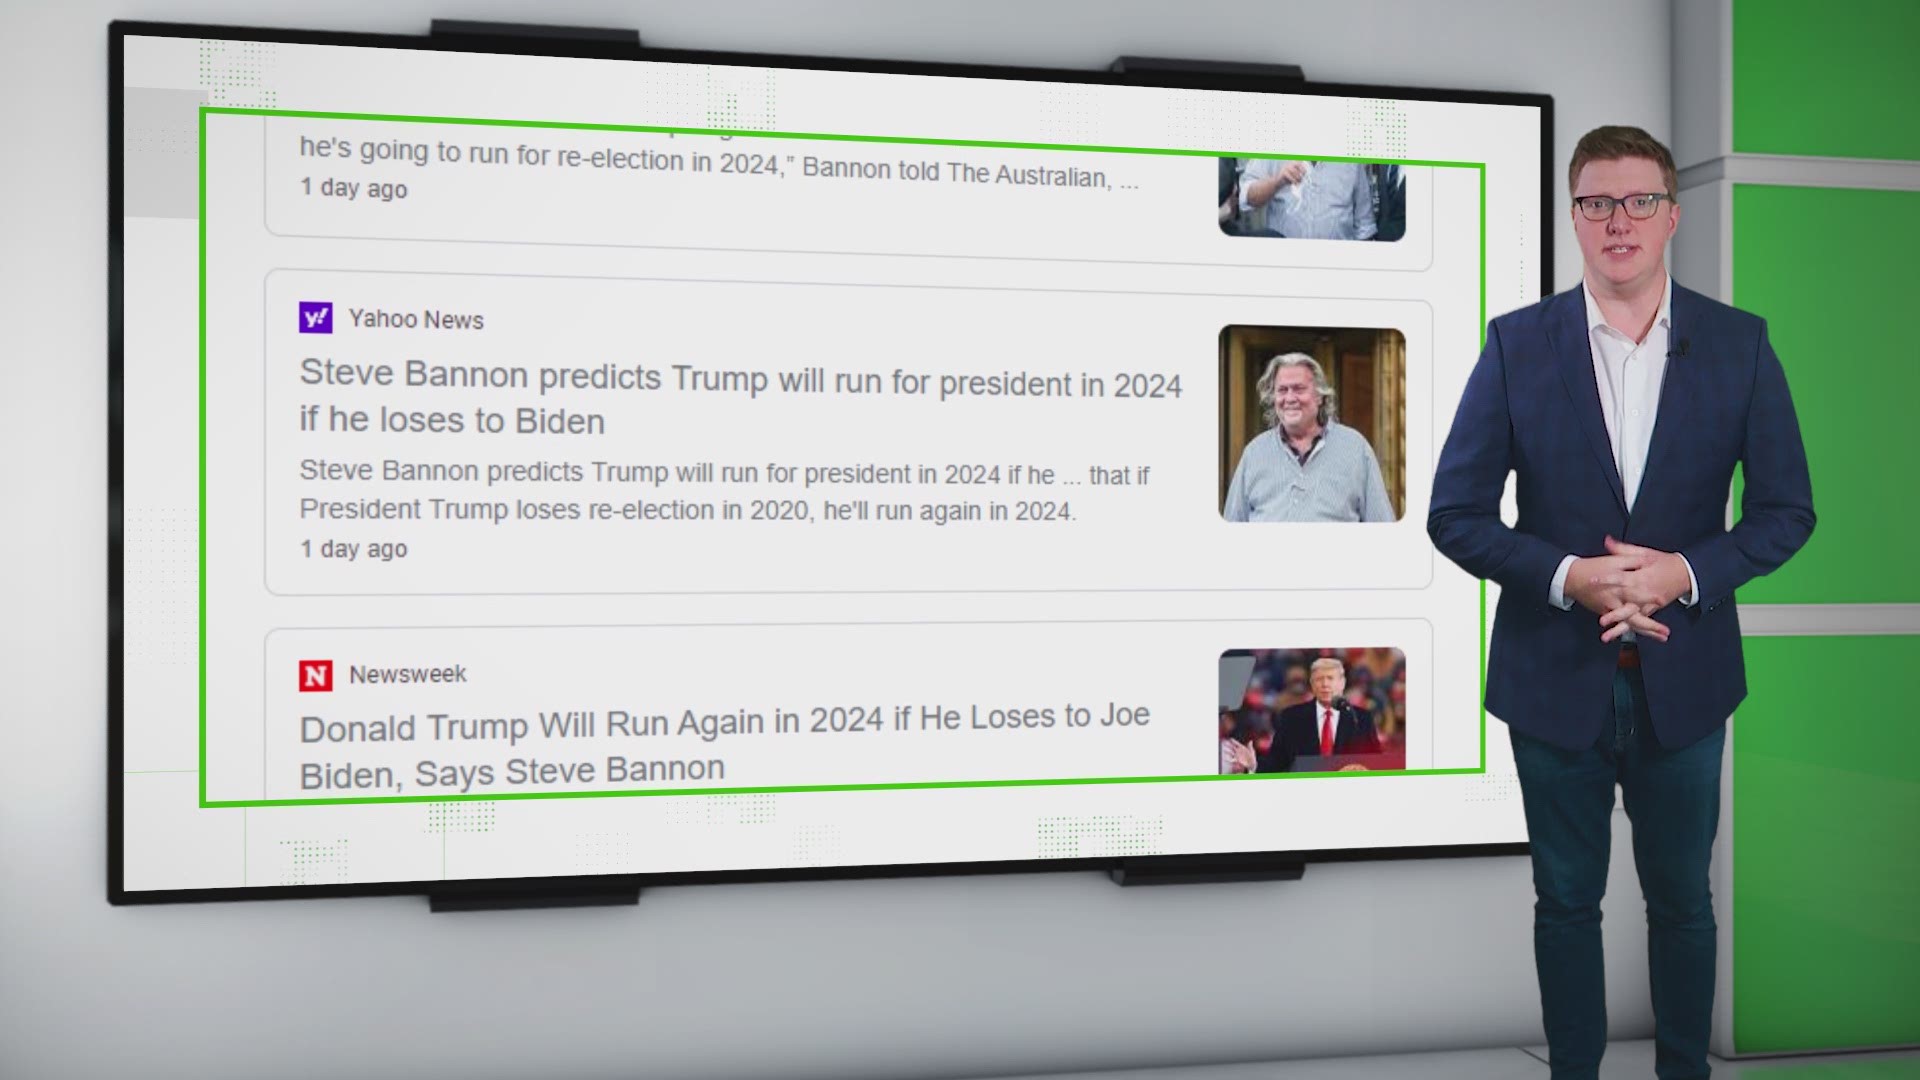 VERIFY: Yes, Trump can run again in 2024 if he loses the 2020 election. | 0